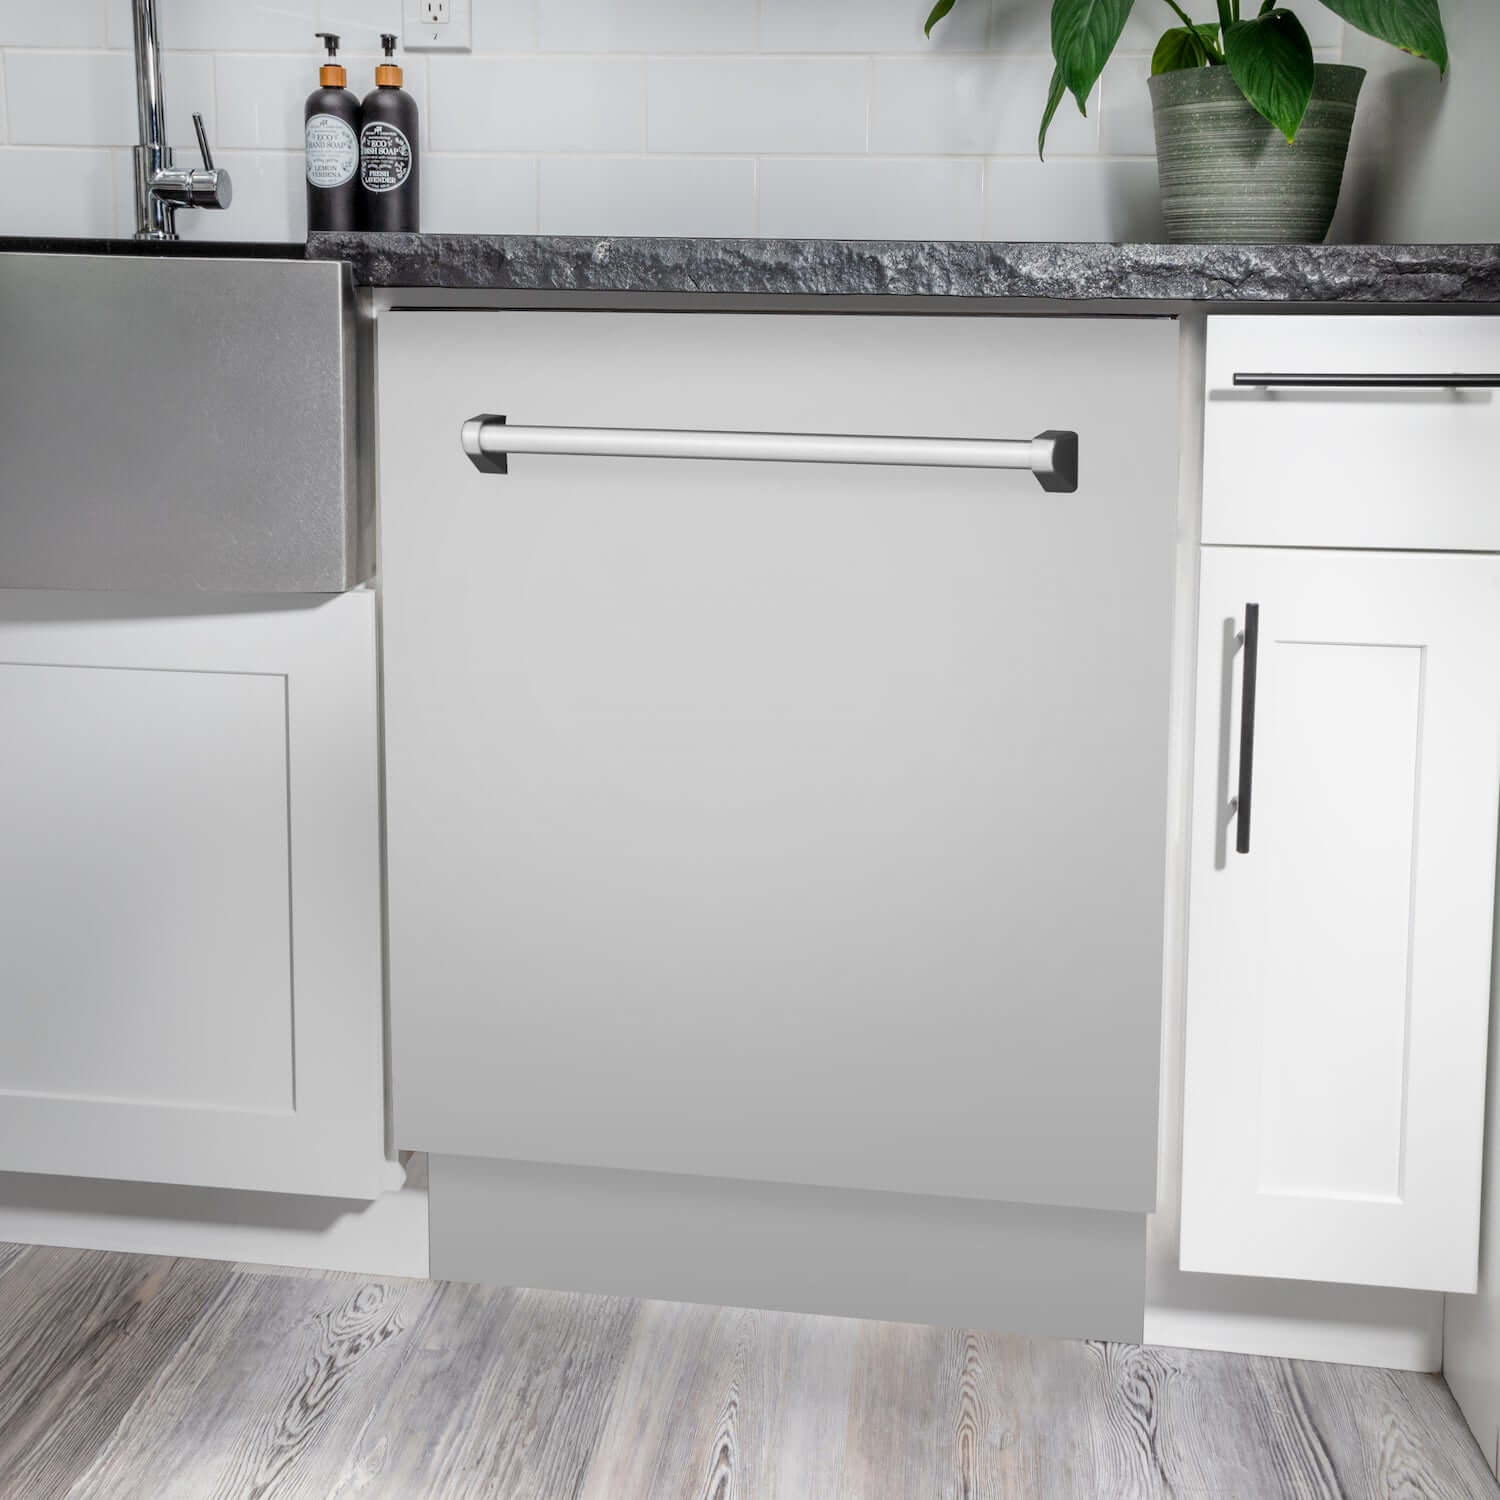 ZLINE 24" Stainless Steel Dishwasher built-in to cabinets below counters in a kitchen.